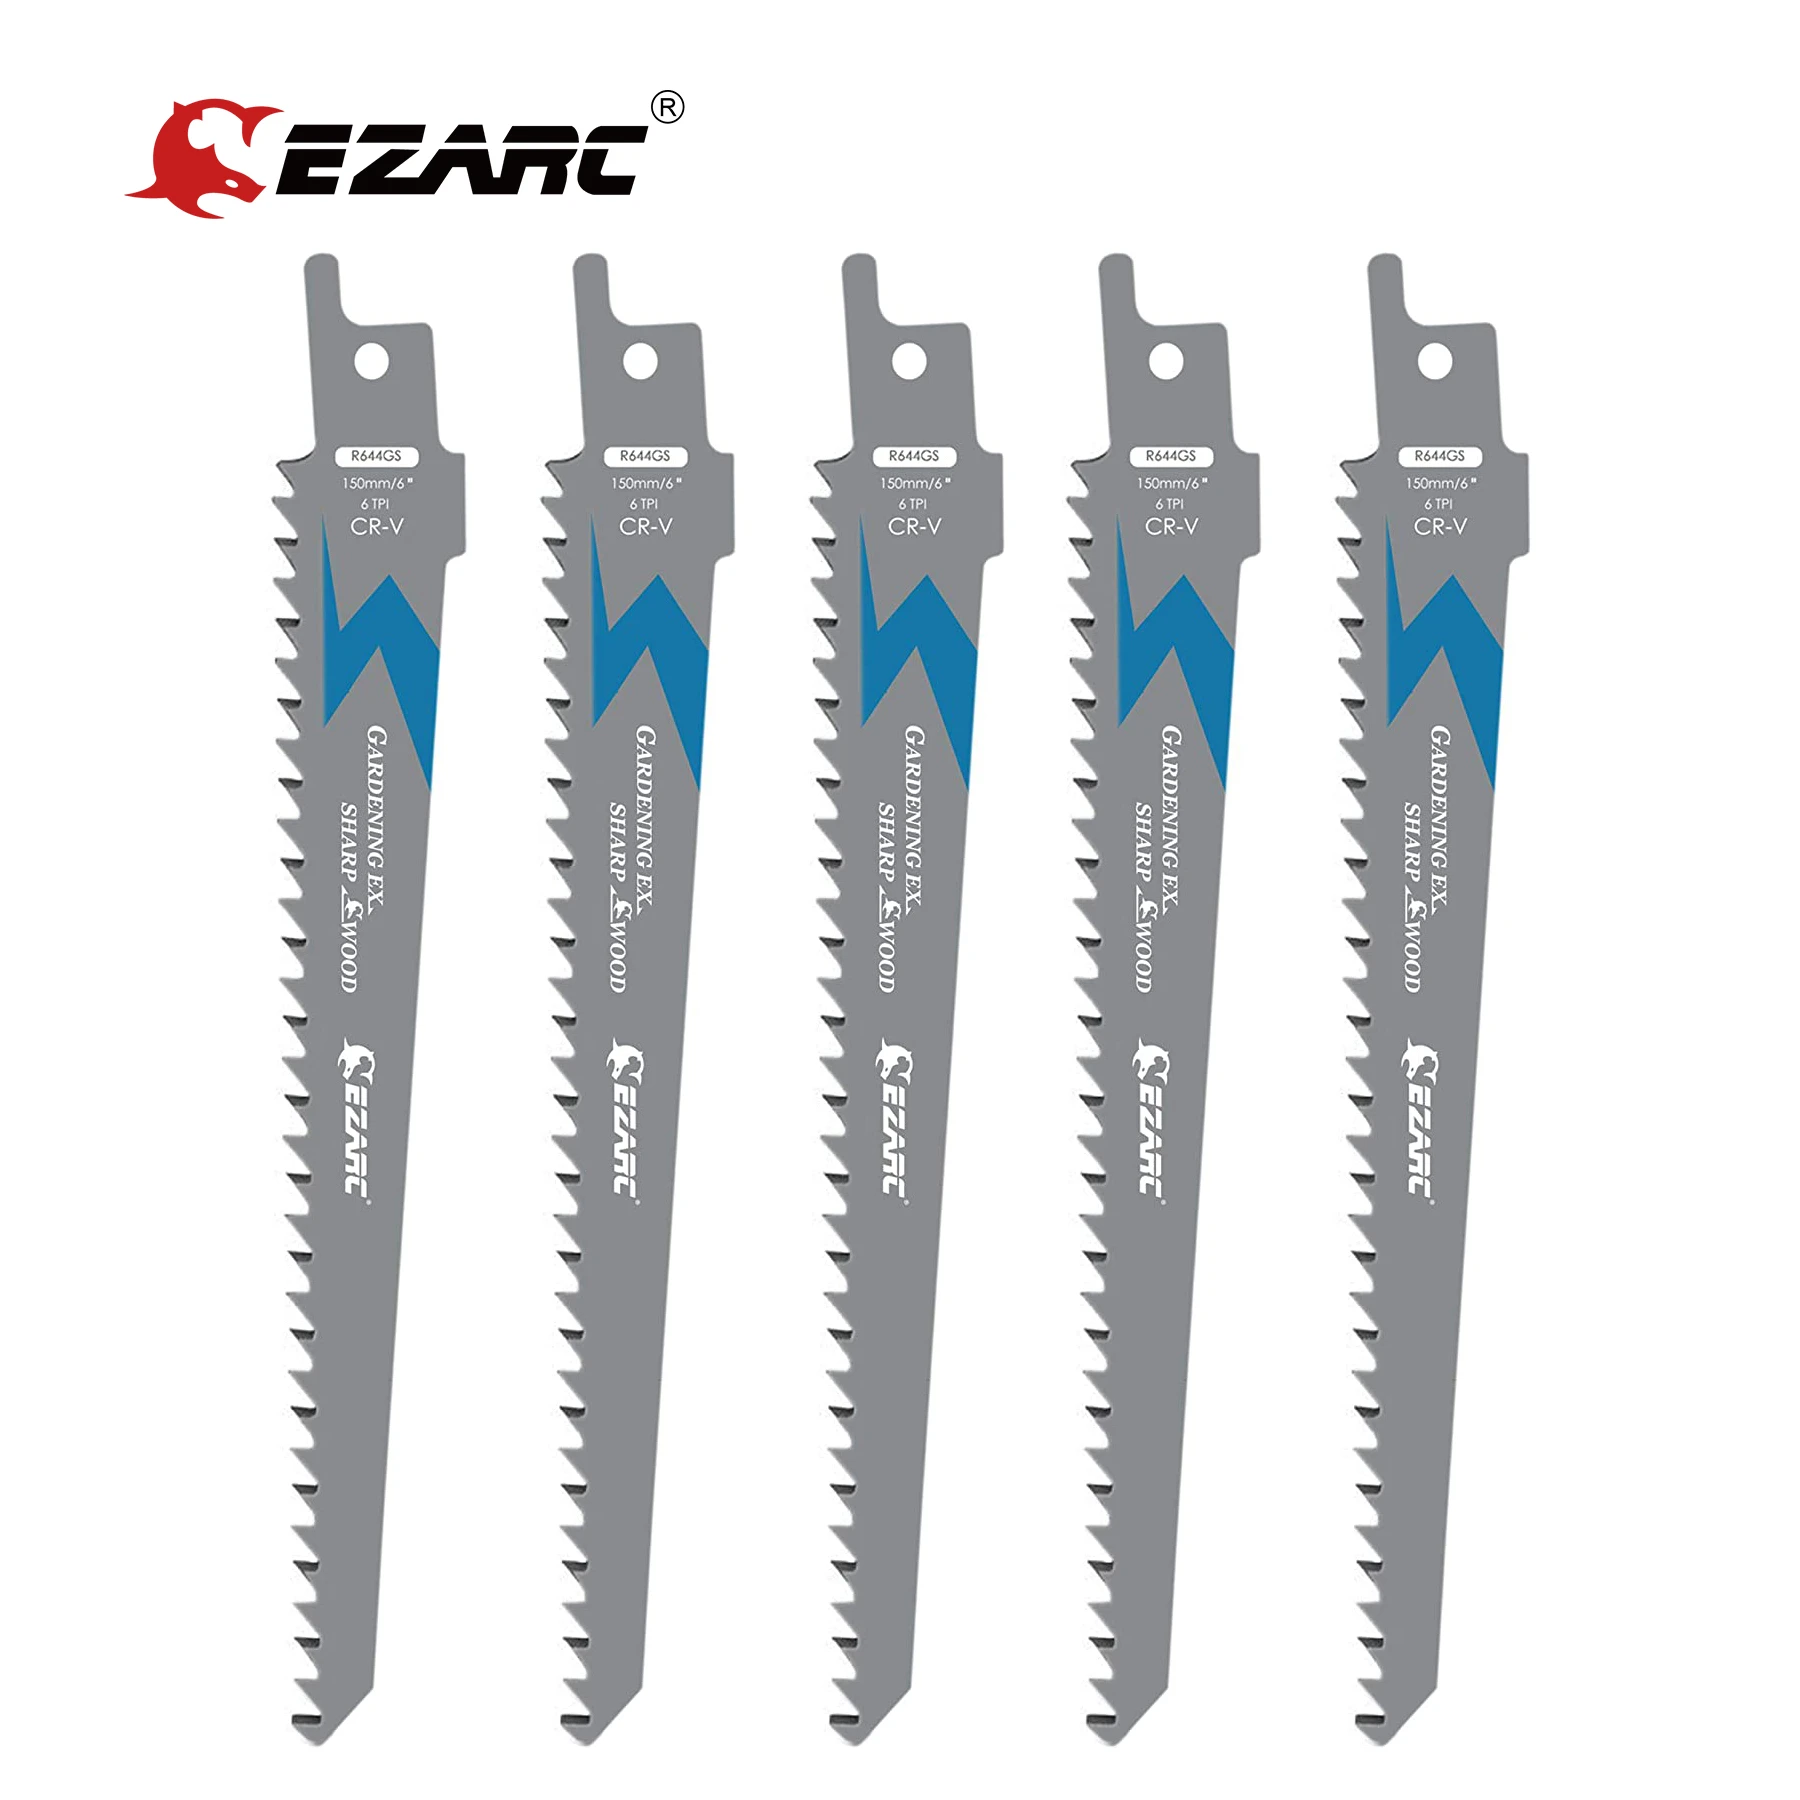 EZARC Wood Pruning Reciprocating Saw Blade Sharp Ground Teeth For Wood Fast Cutting 5TPI (5-Pack)